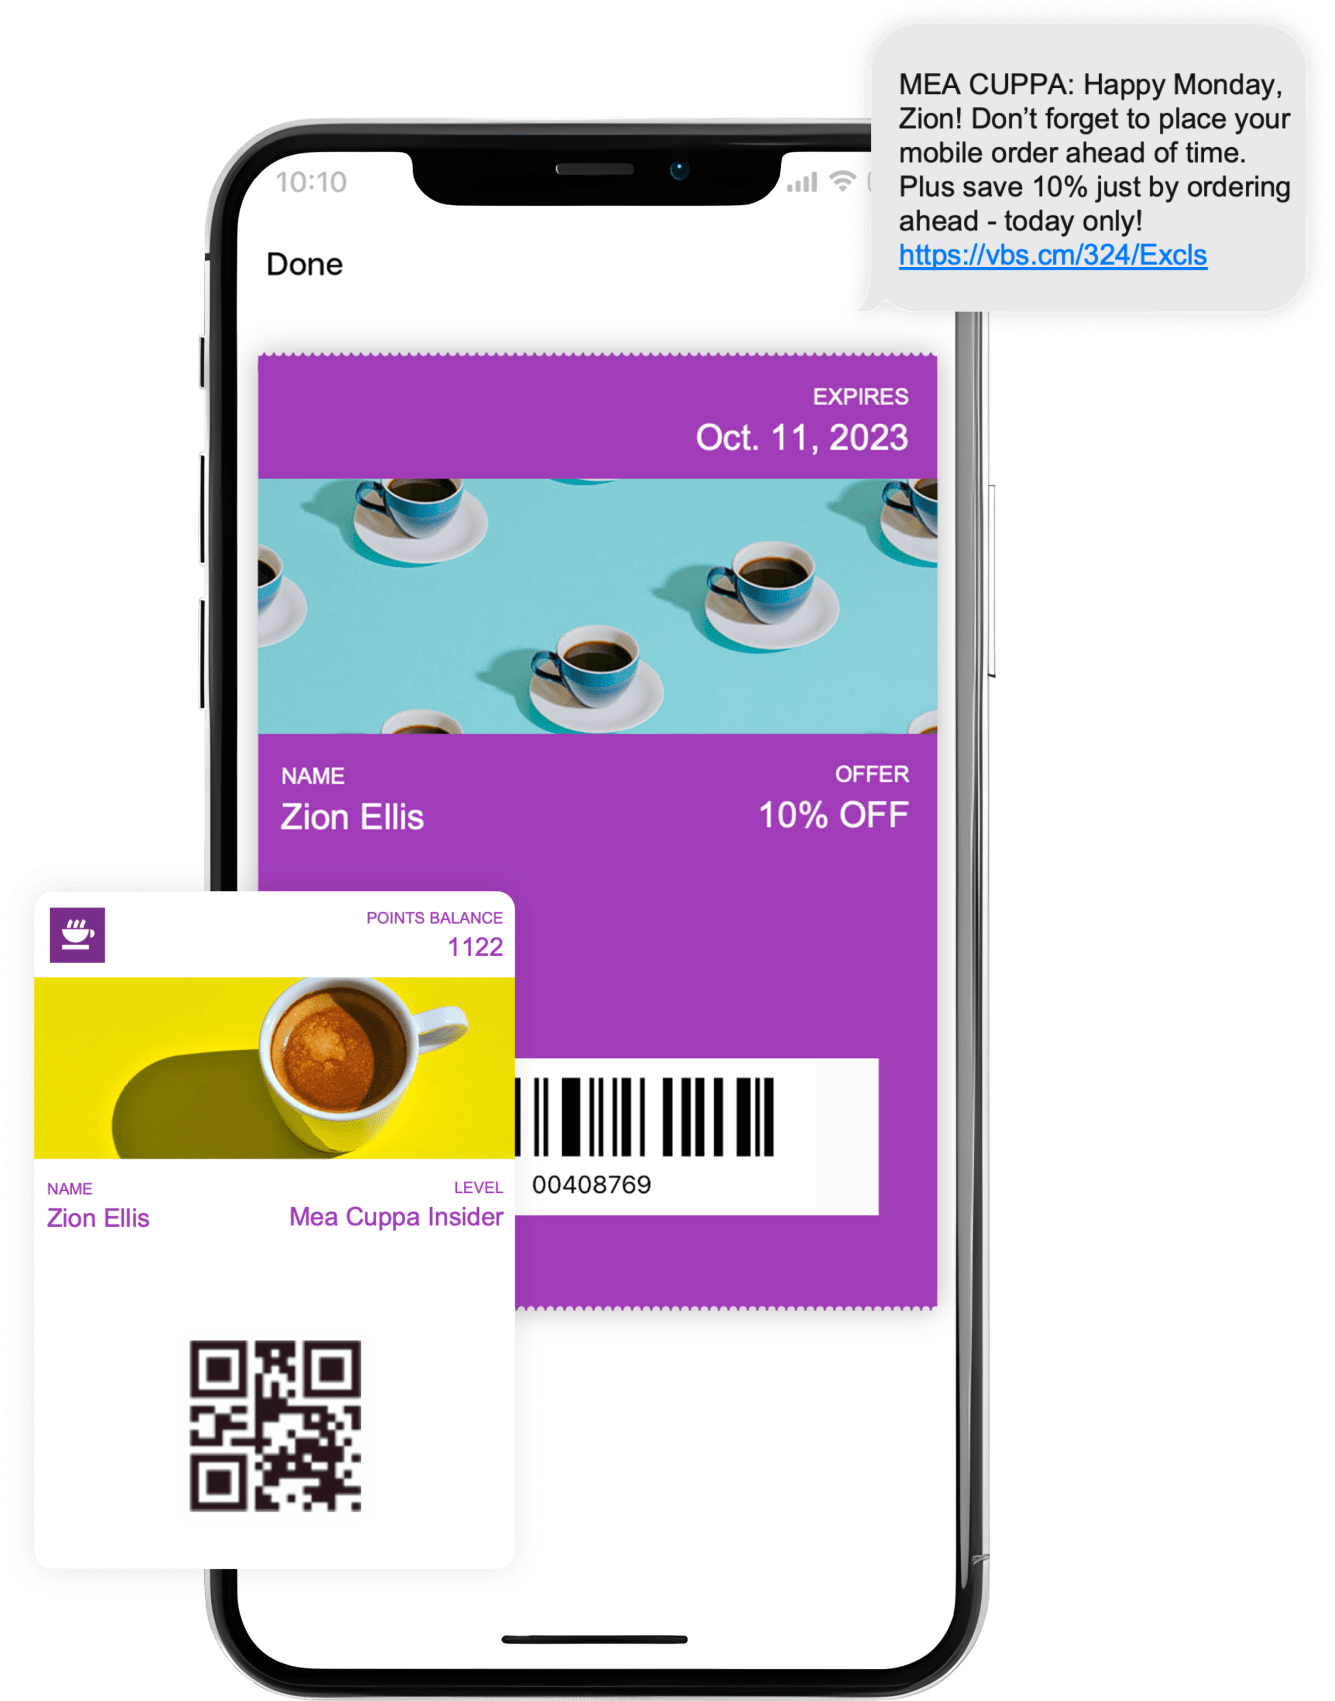 Mobile Wallet for loyalty and digital offers